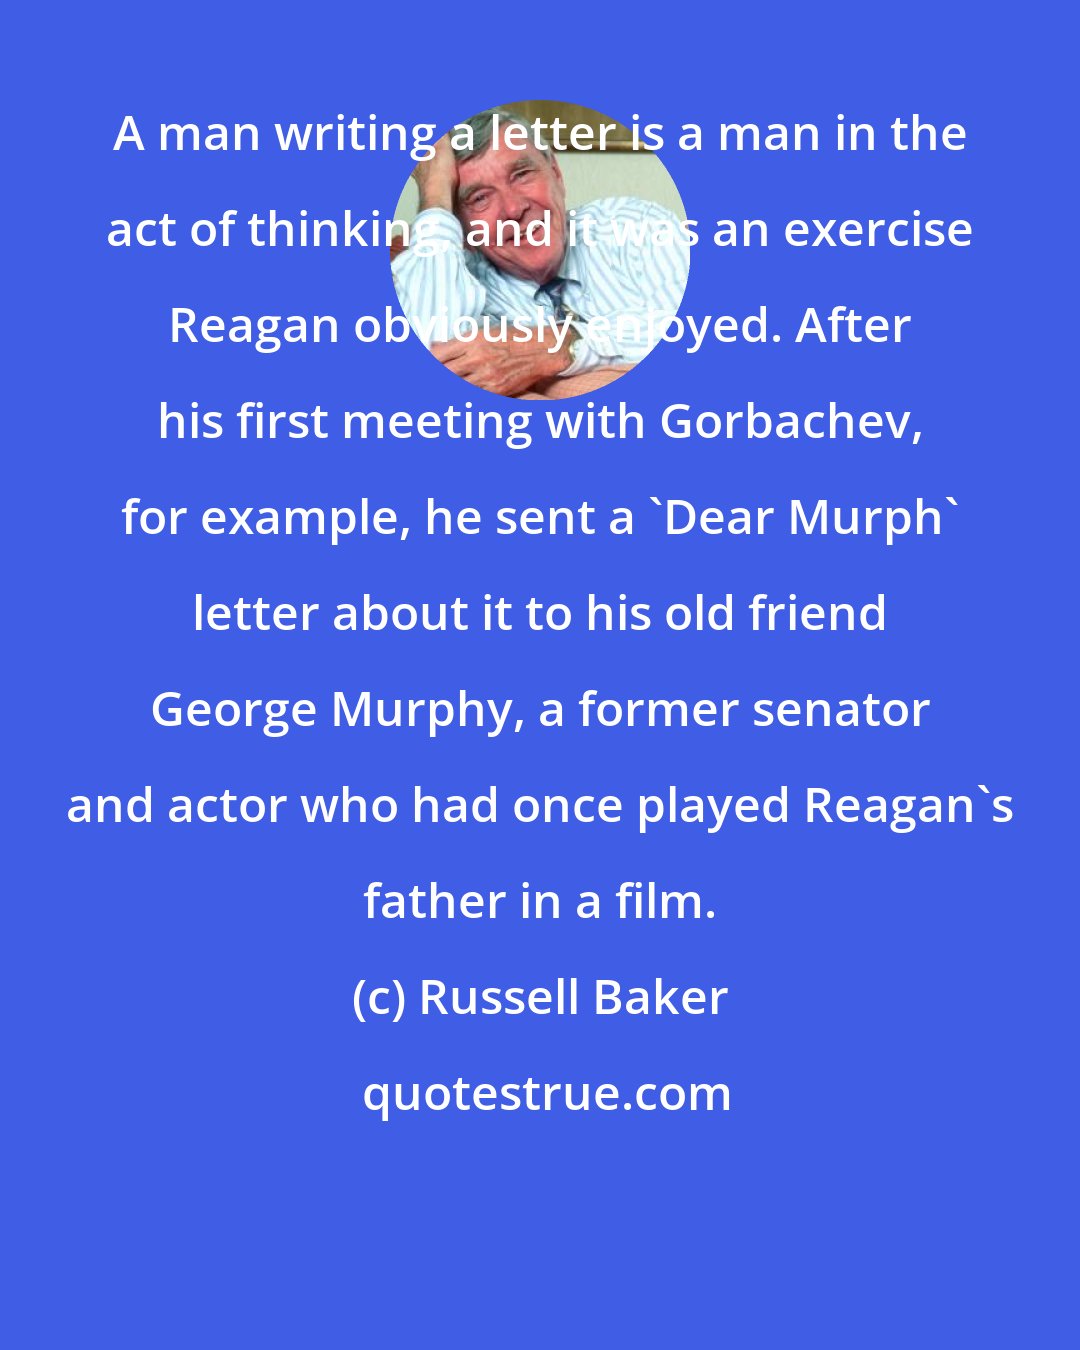 Russell Baker: A man writing a letter is a man in the act of thinking, and it was an exercise Reagan obviously enjoyed. After his first meeting with Gorbachev, for example, he sent a 'Dear Murph' letter about it to his old friend George Murphy, a former senator and actor who had once played Reagan's father in a film.